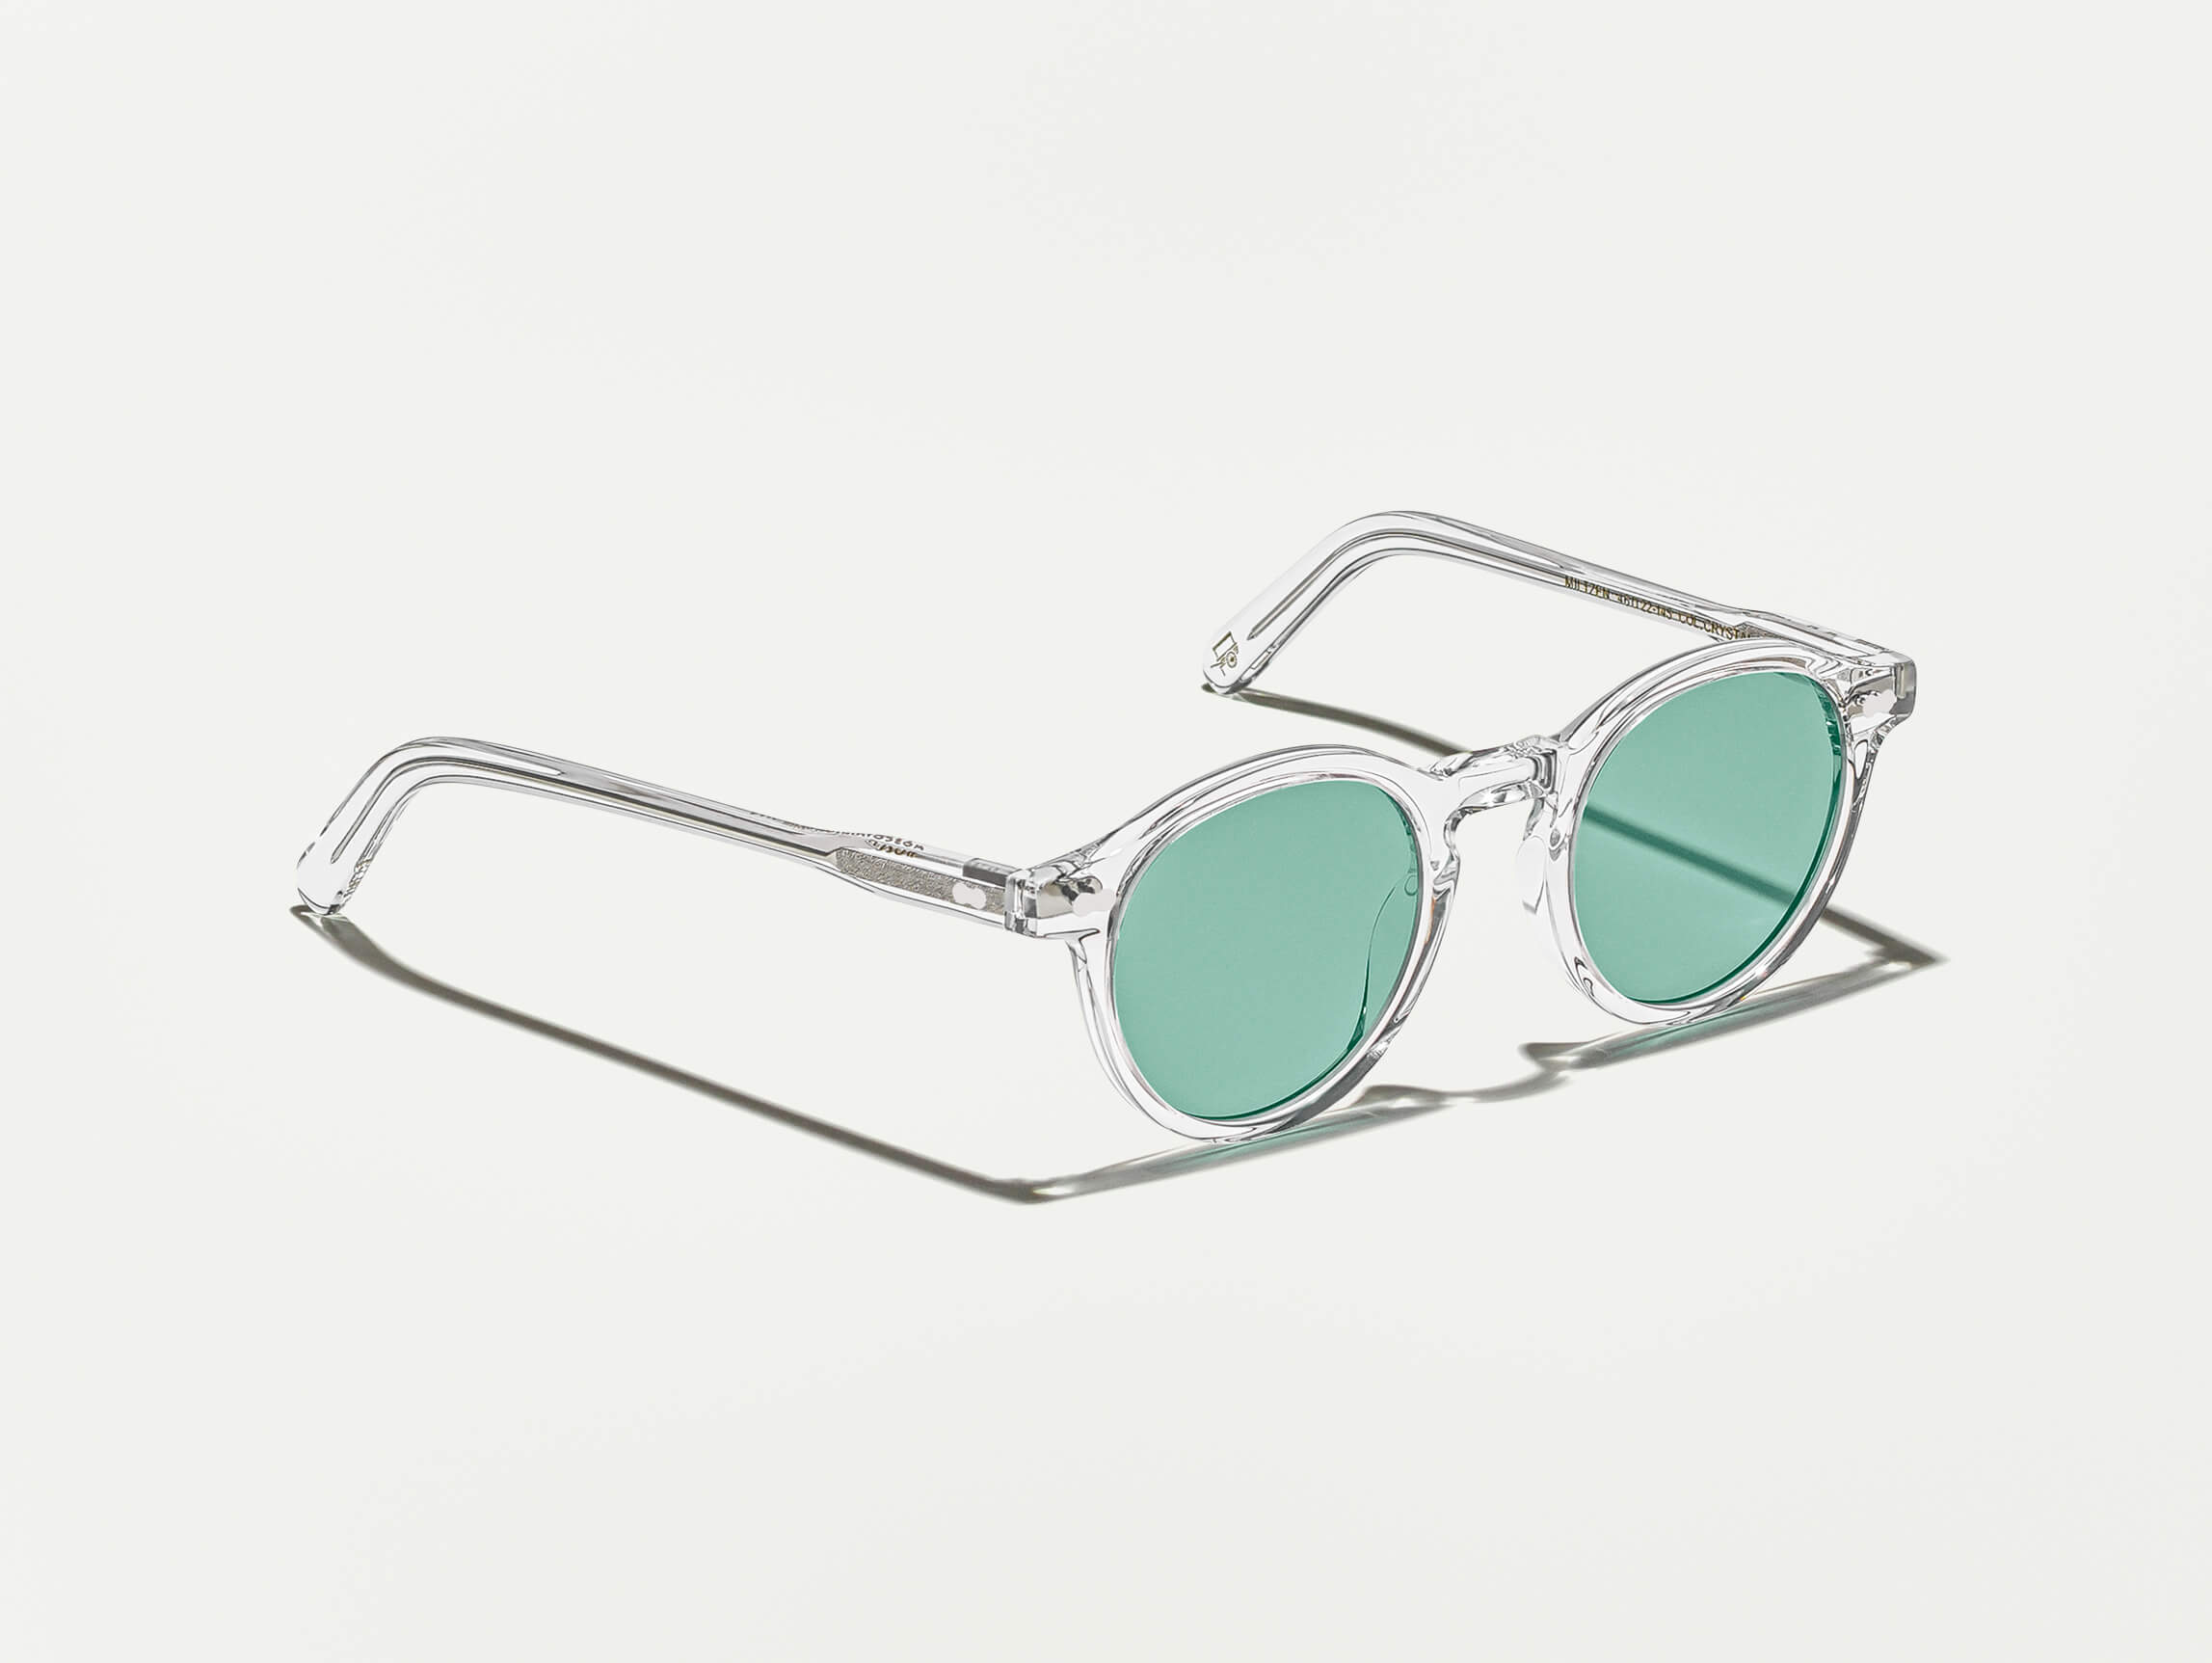 The MILTZEN Crystal with Turquoise Tinted Lenses